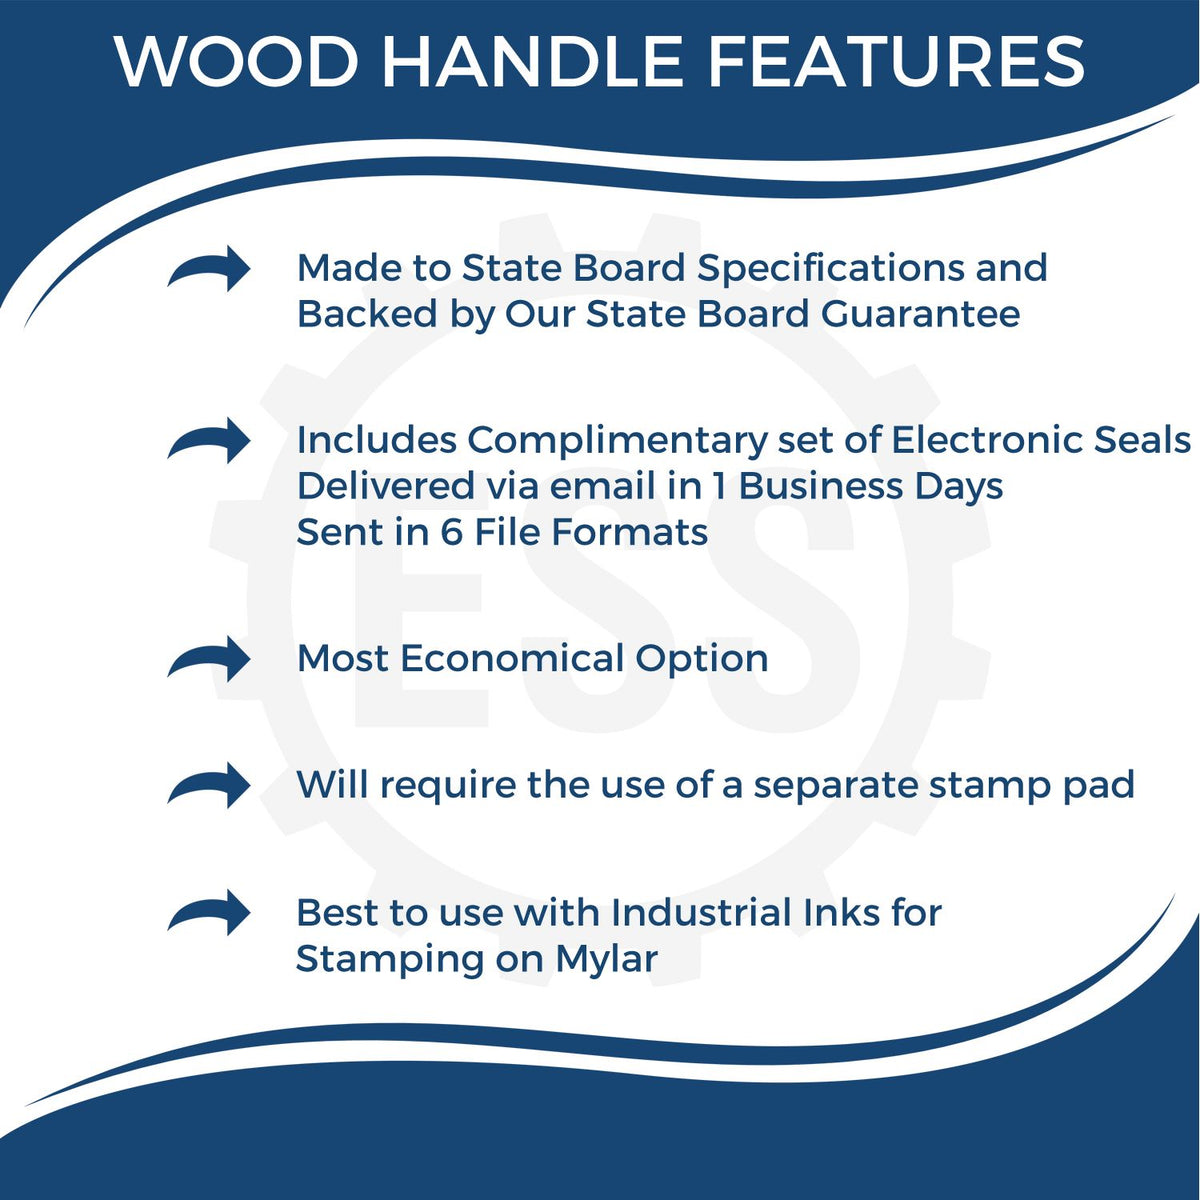 A picture of an infographic highlighting the selling points for the Wooden Handle Missouri Rectangular Notary Public Stamp